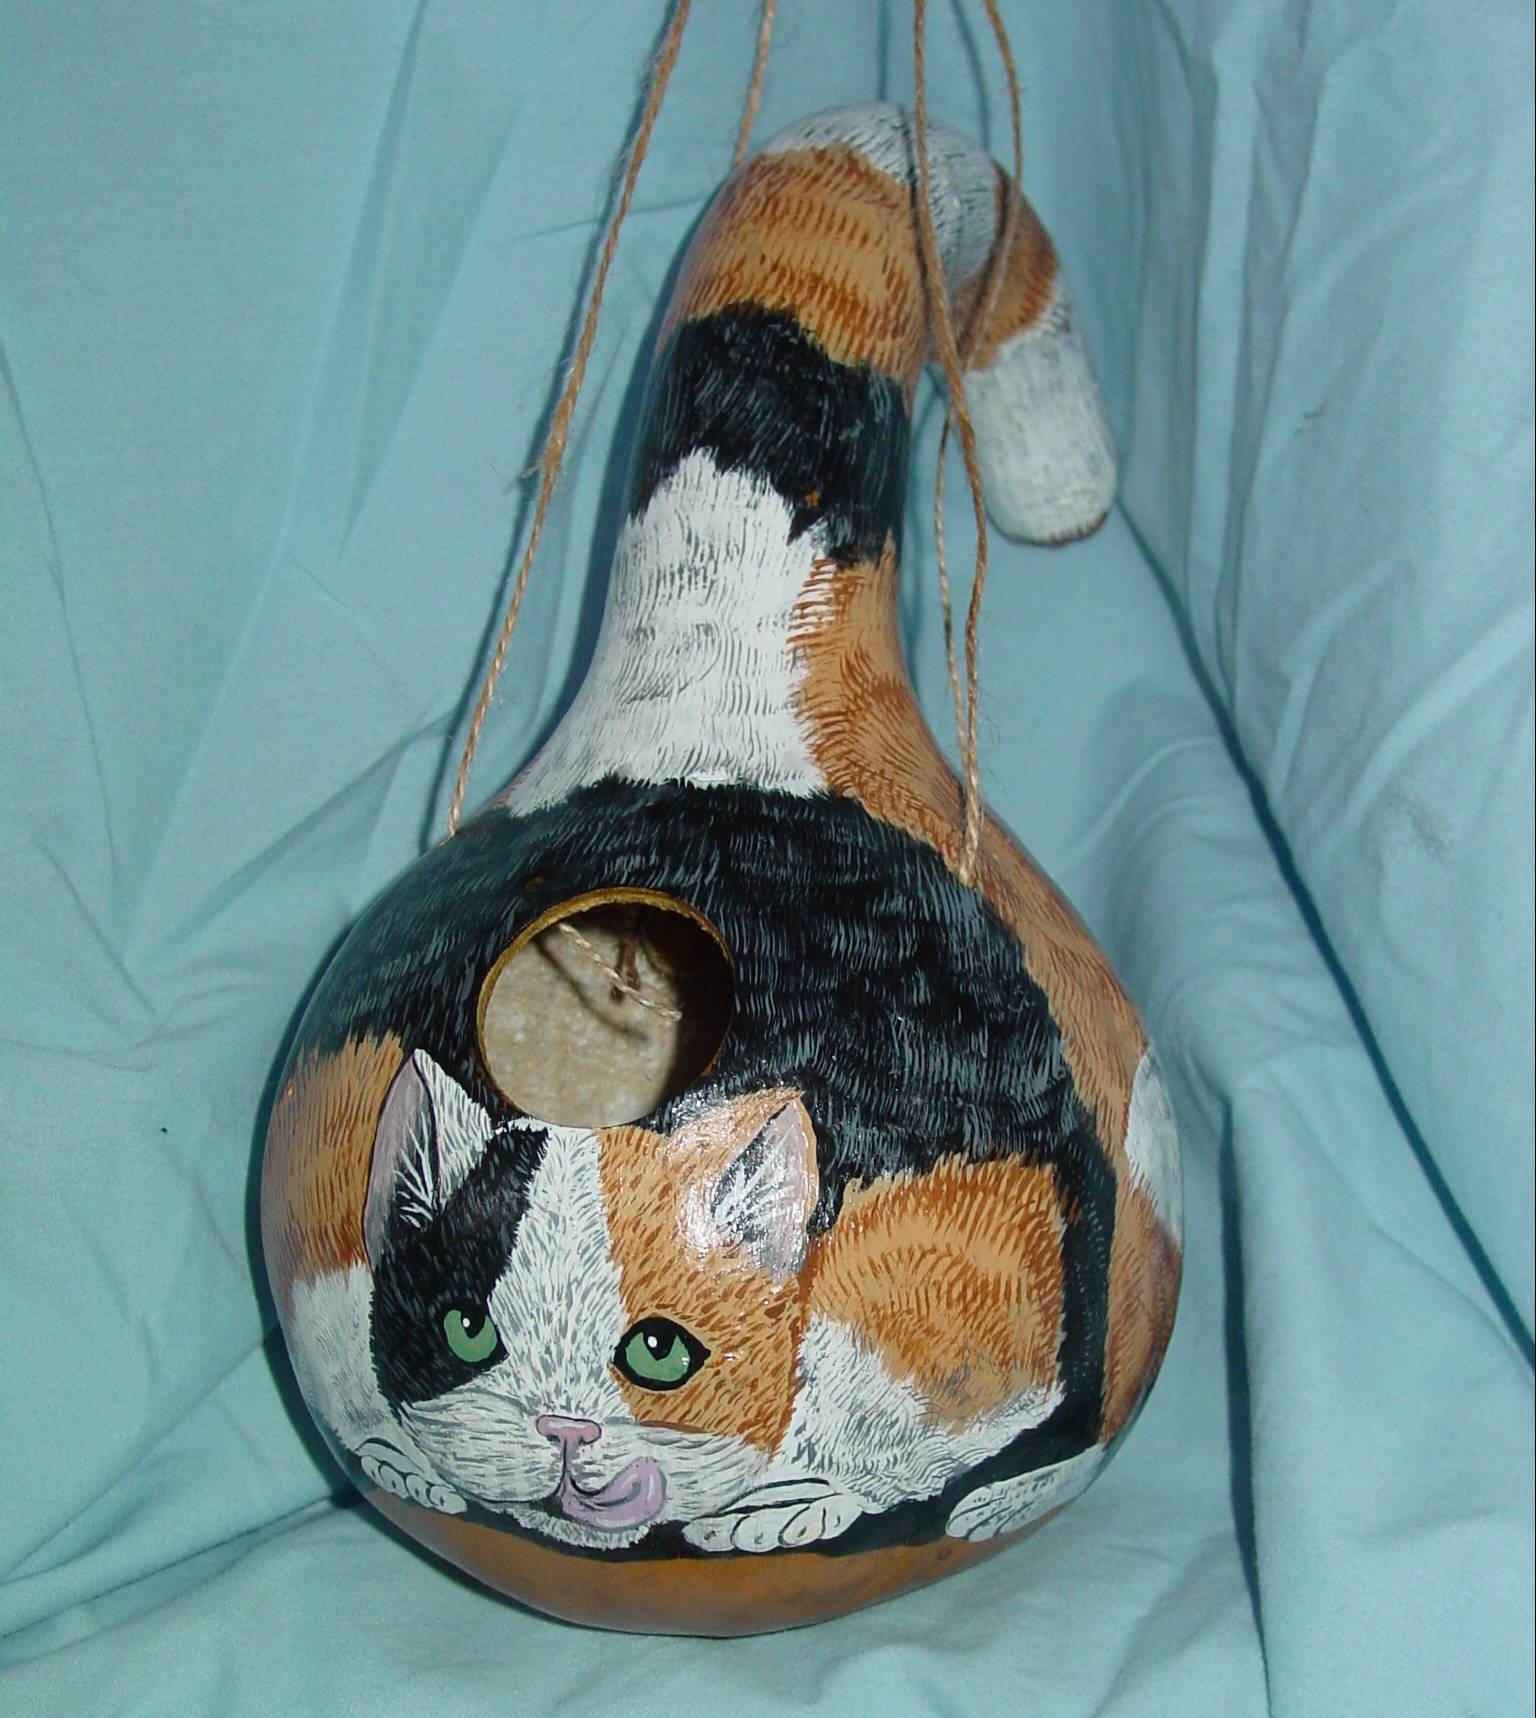 Calico Cat Birdhouse - Made from a dried gourd and hand-painted this fun-loving birdhouse is sure to bring smiles.